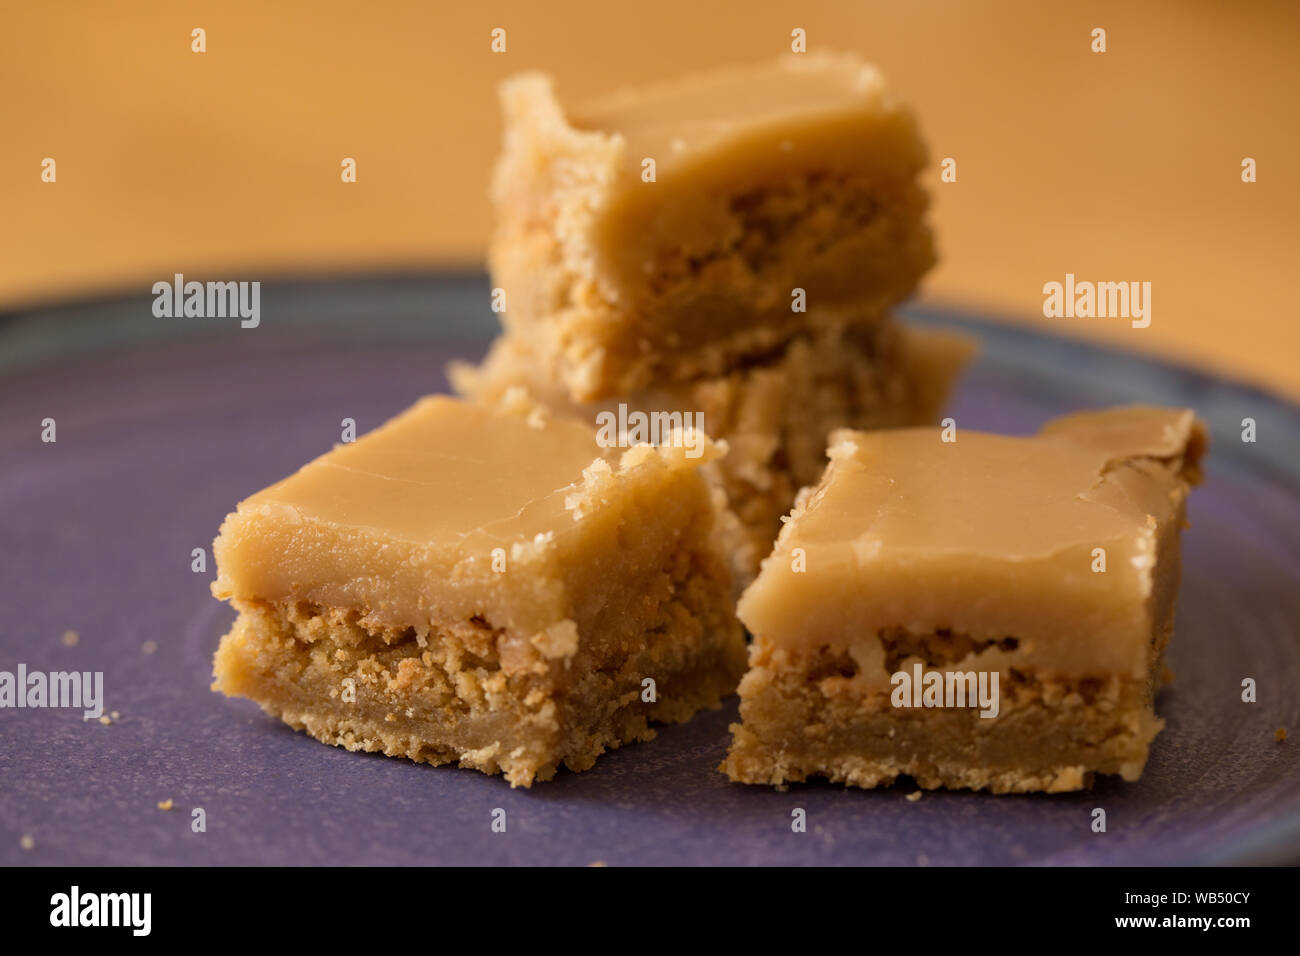 Four pieces of butterscotch square on blue plate with crumbs Stock Photo